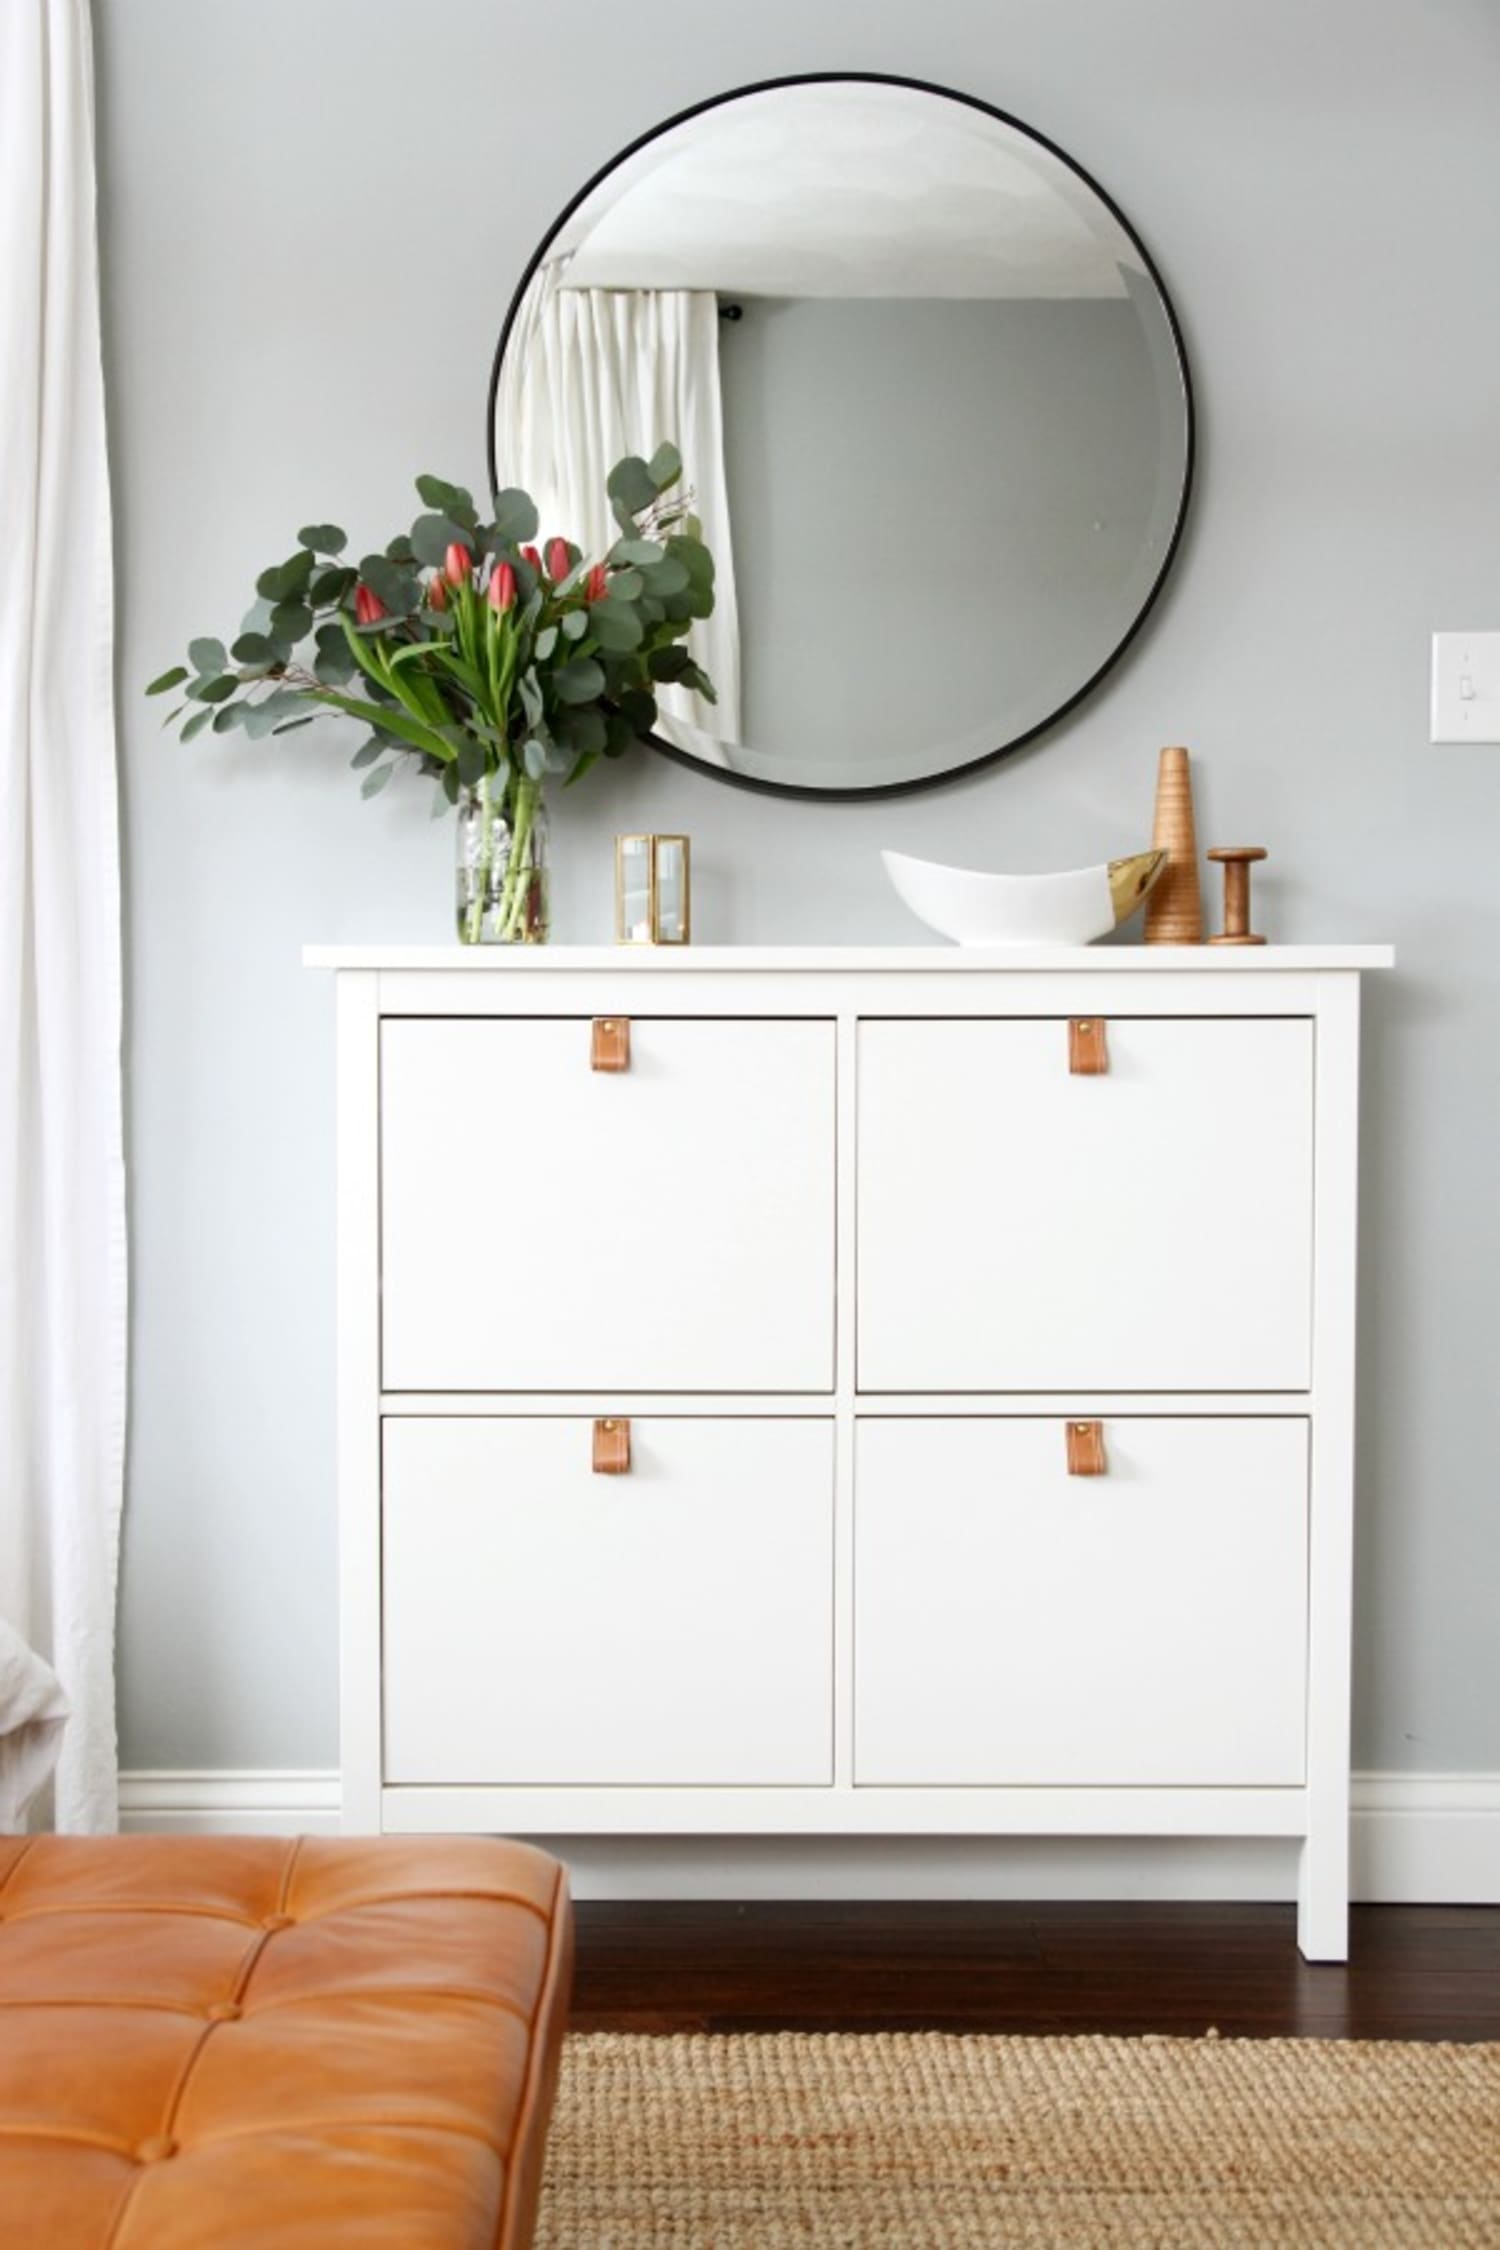 Big Impact, Small Effort: Easy Upgrades for IKEA Furniture